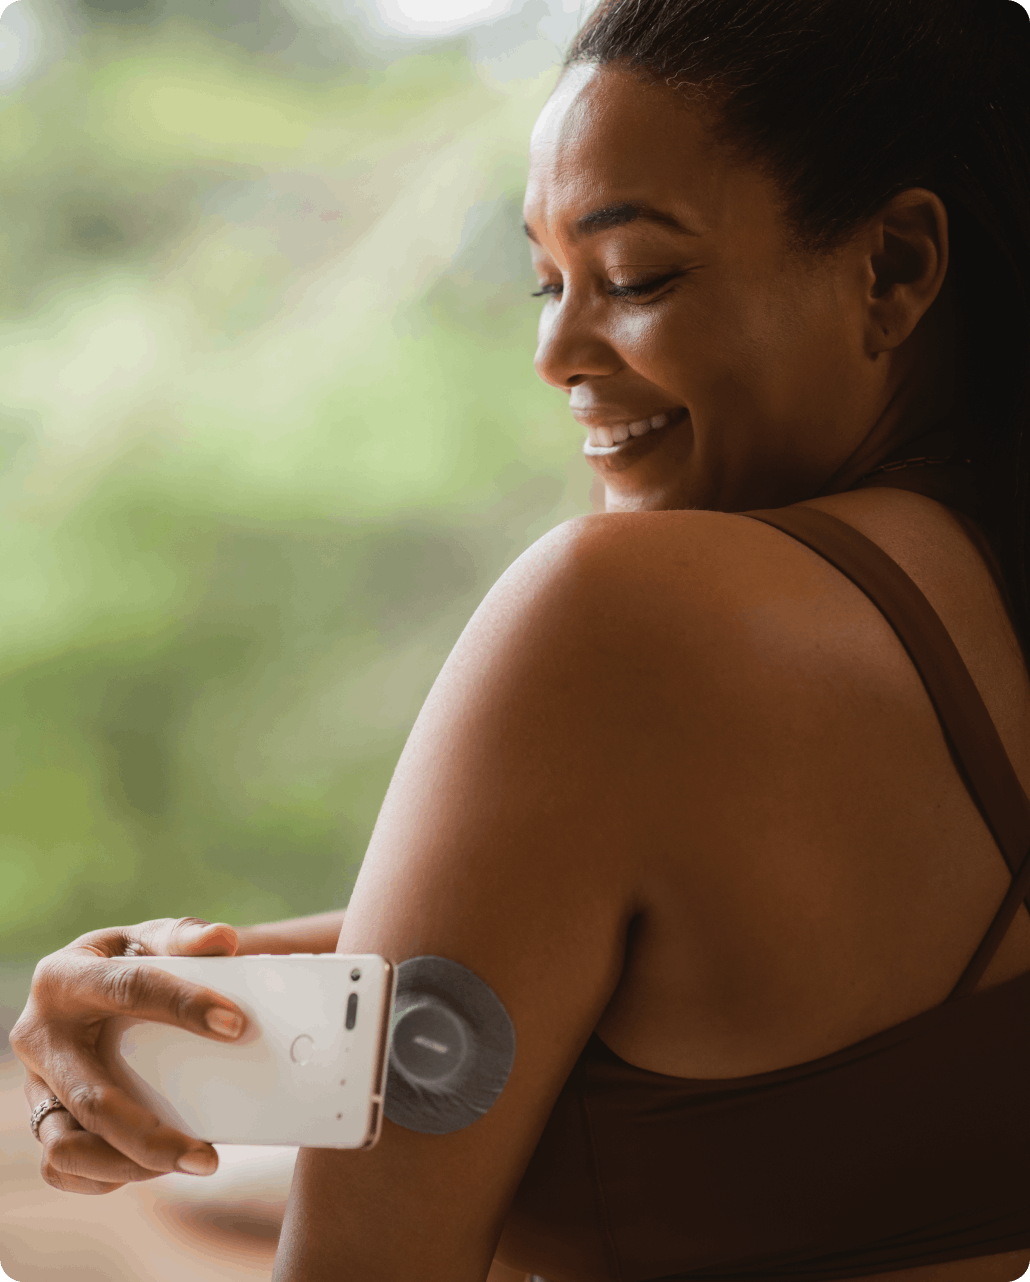 A middle-aged black woman scans the Veri CGM on her arm, using her Android smartphone